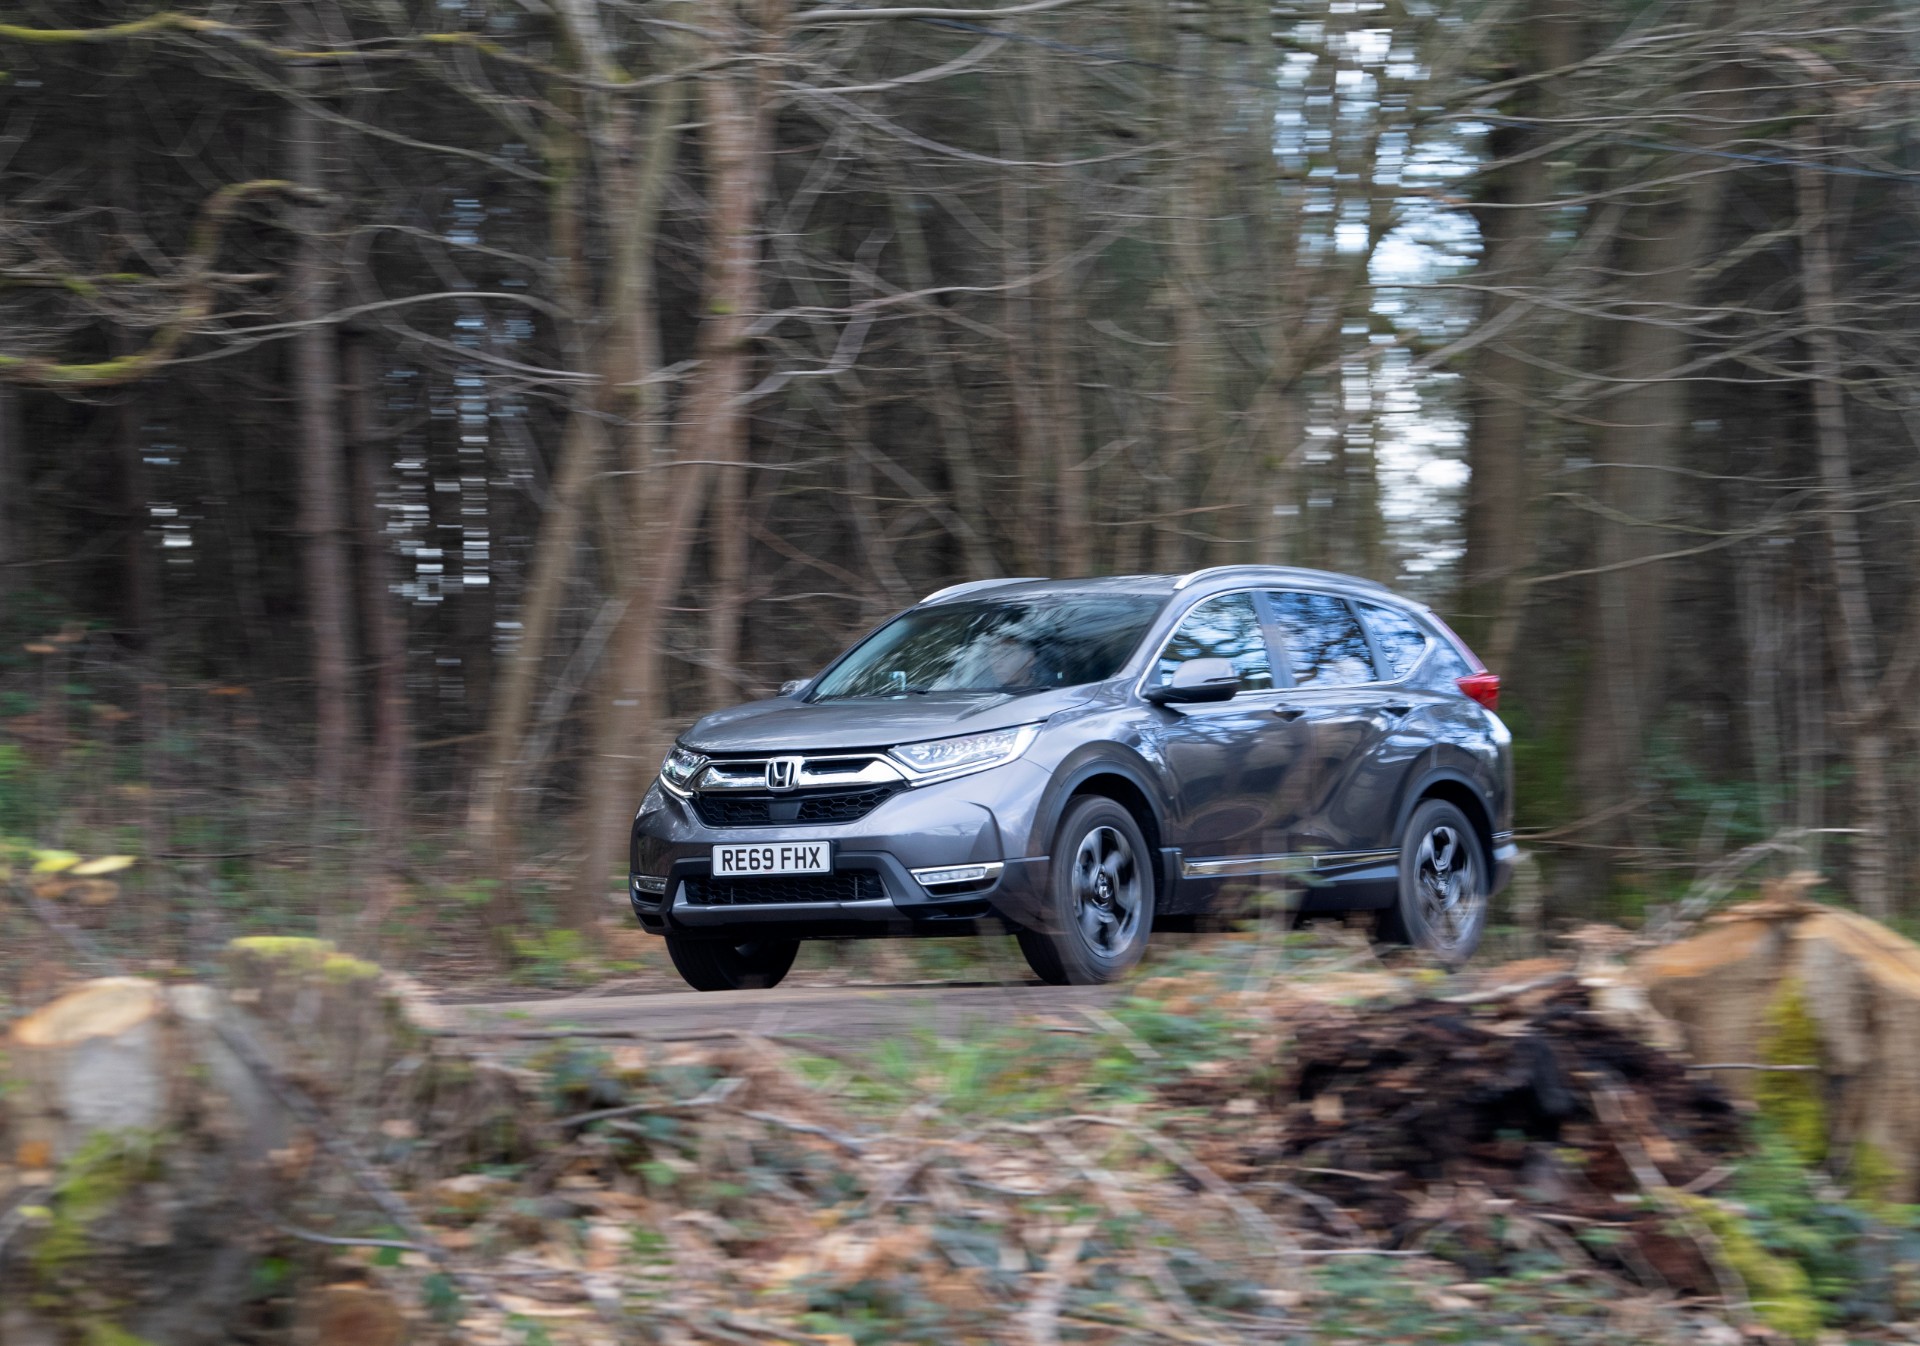 Honda CR-V Hybrid review - ride quality - James Mills for Sunday Times Driving.co.uk